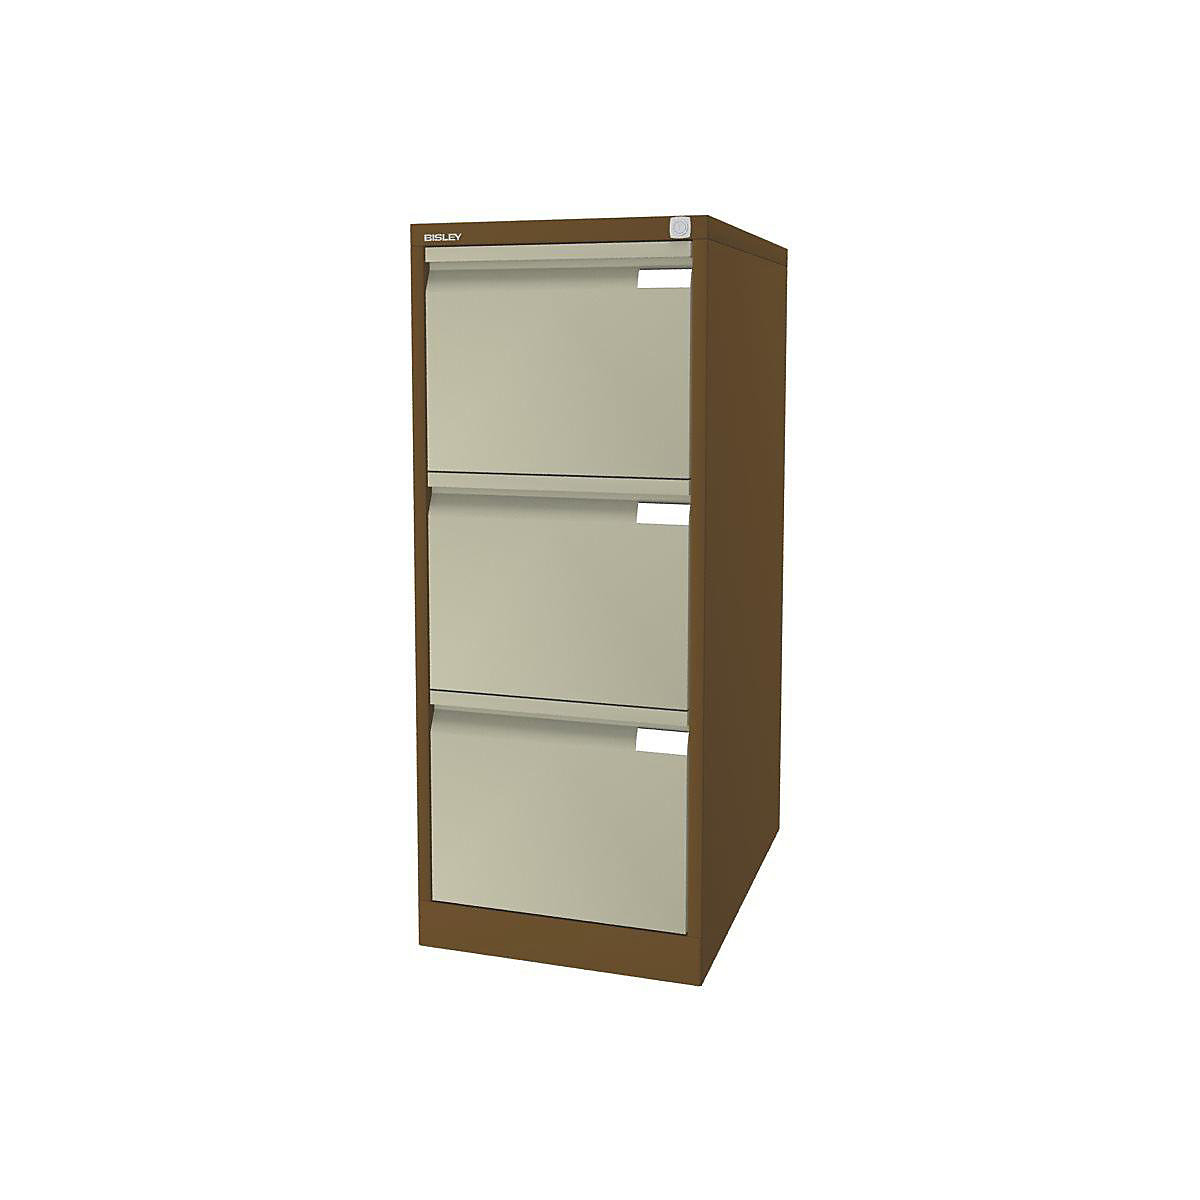 Suspension file cabinet, 1-track – BISLEY, 3 A4 drawers, sepia brown/creme-8